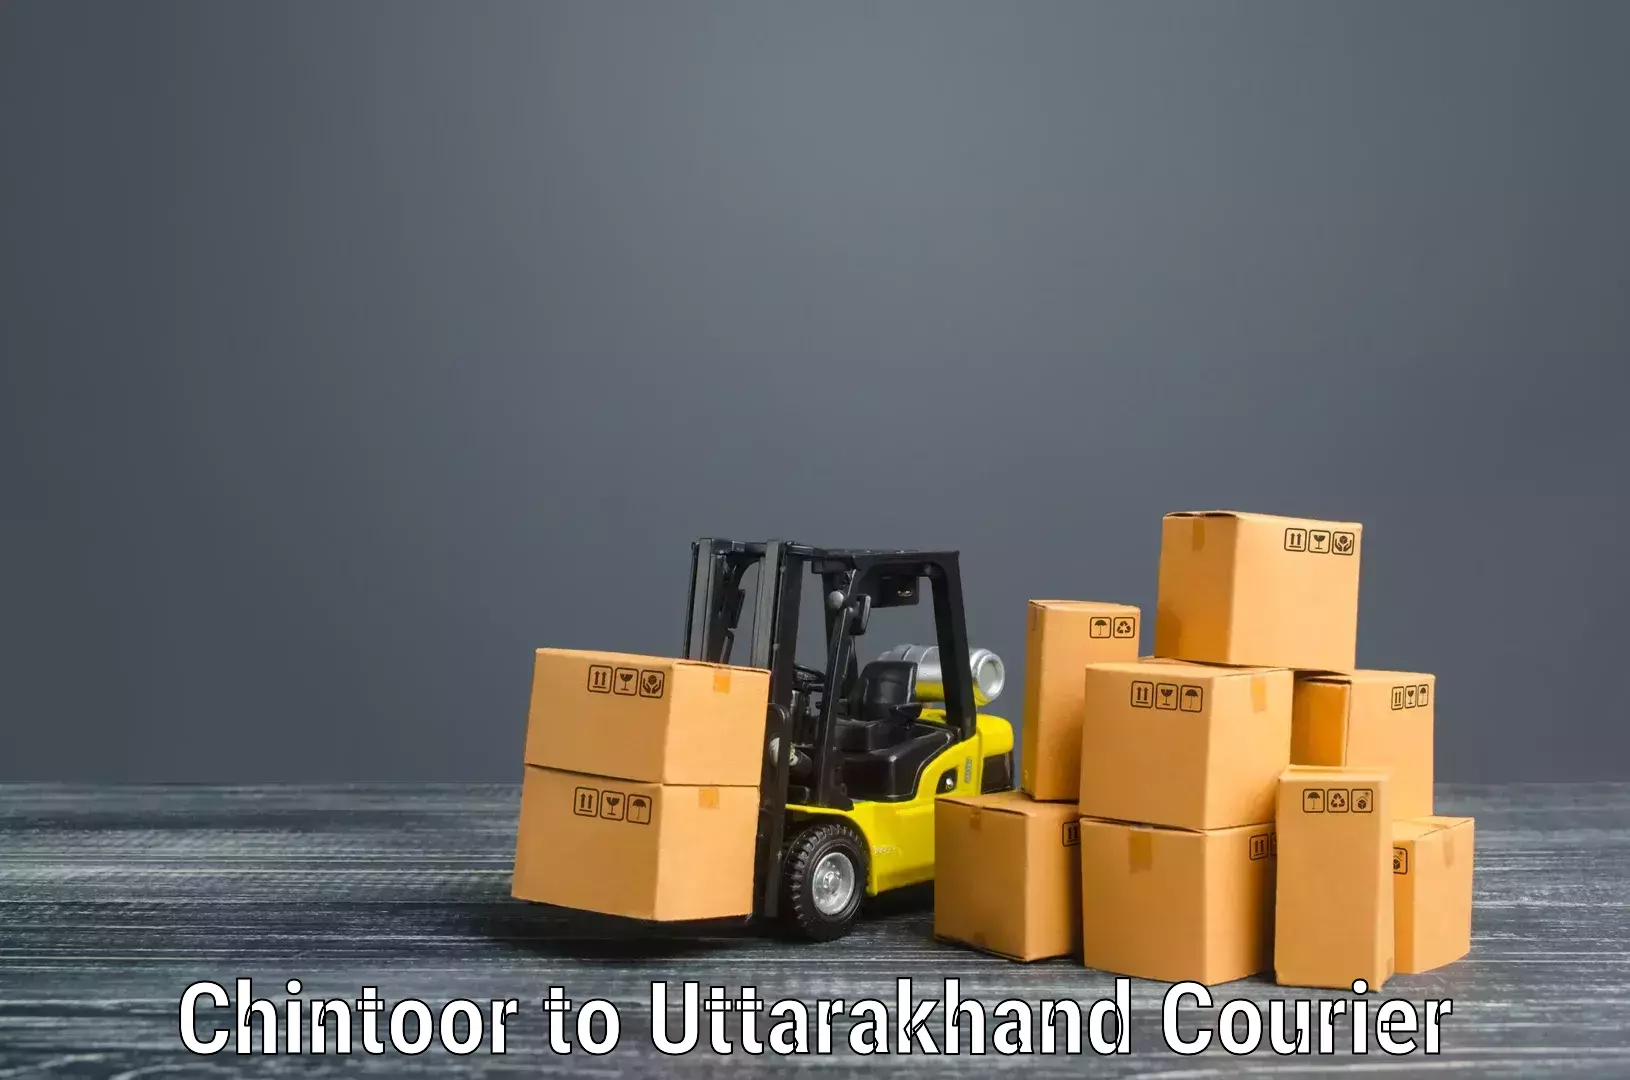 Furniture transport and storage Chintoor to Kashipur